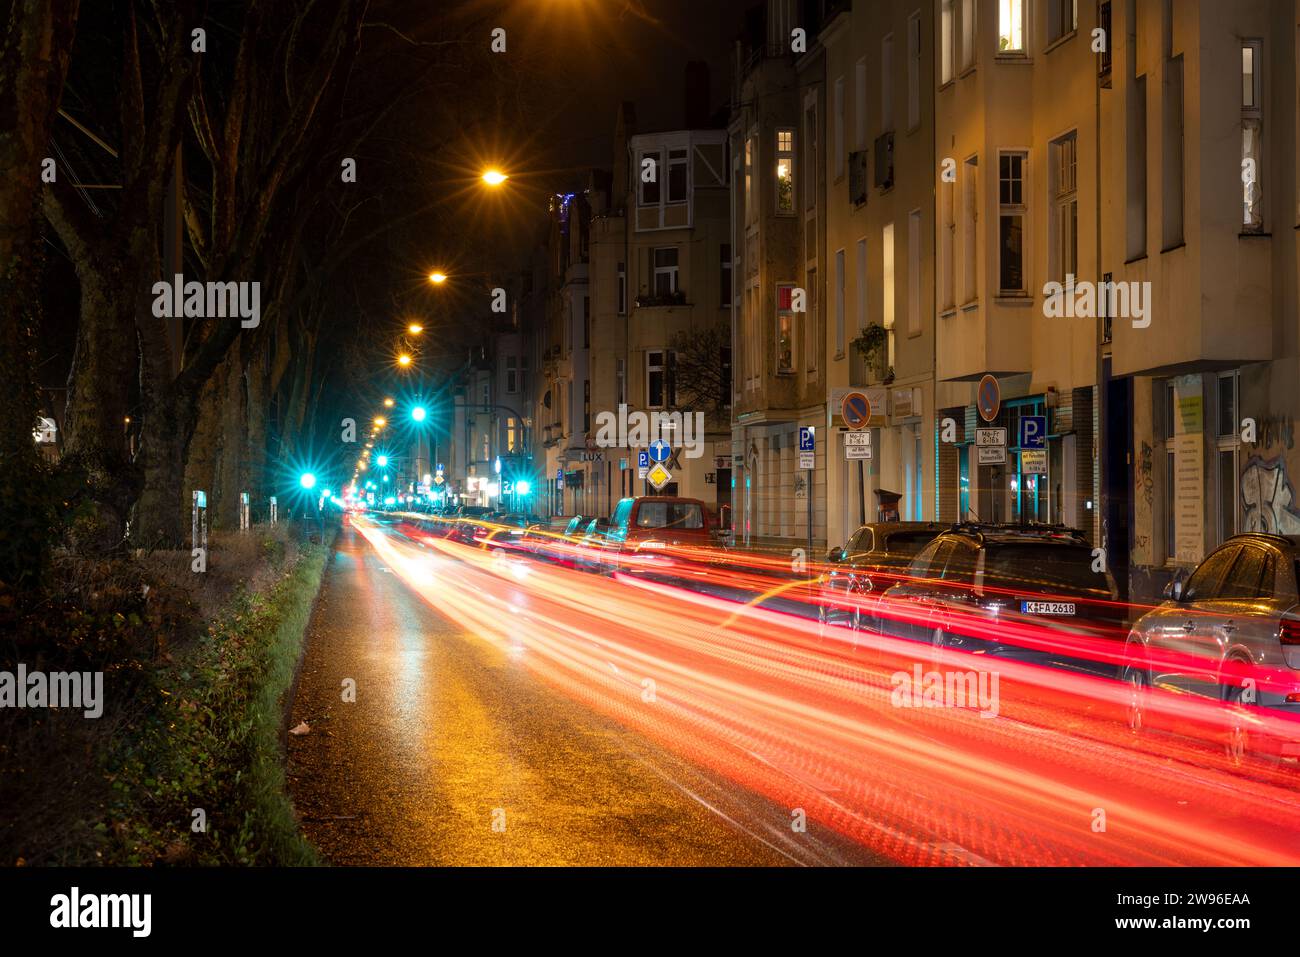 Christmas illumination in Cologne on a winter evening Stock Photo